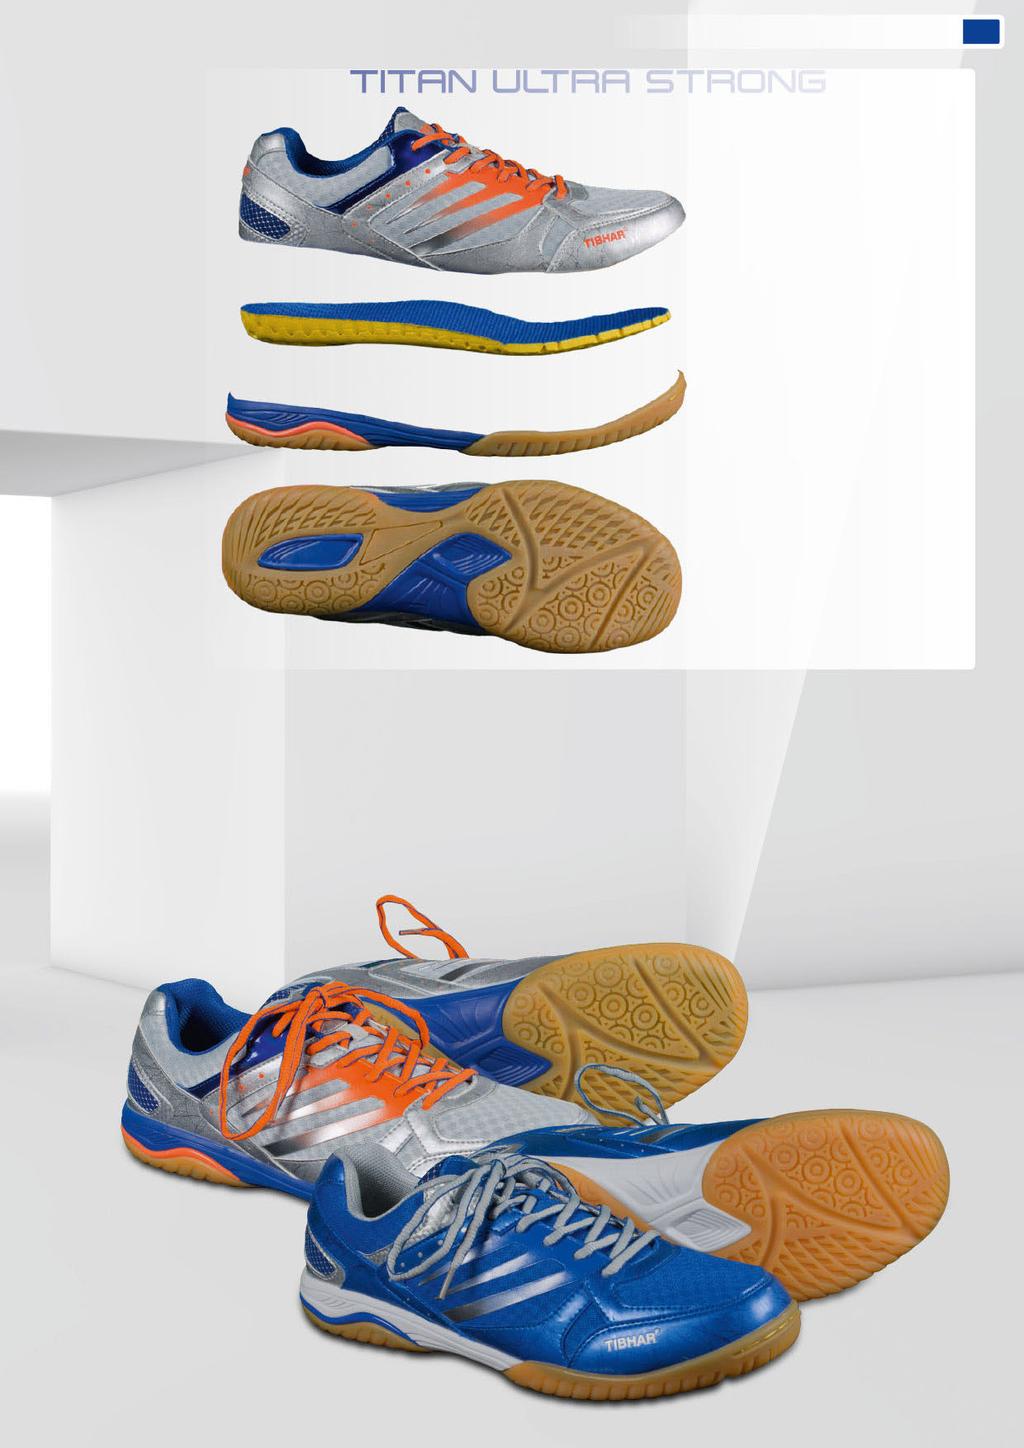 TITAN ULTRA STRONG SHOES 91 Soft-Skin microfibre for a pleasant wear Comfortable thermo active insole with air canals The energy converter absorbs the movement vibrations Two-component phylon for